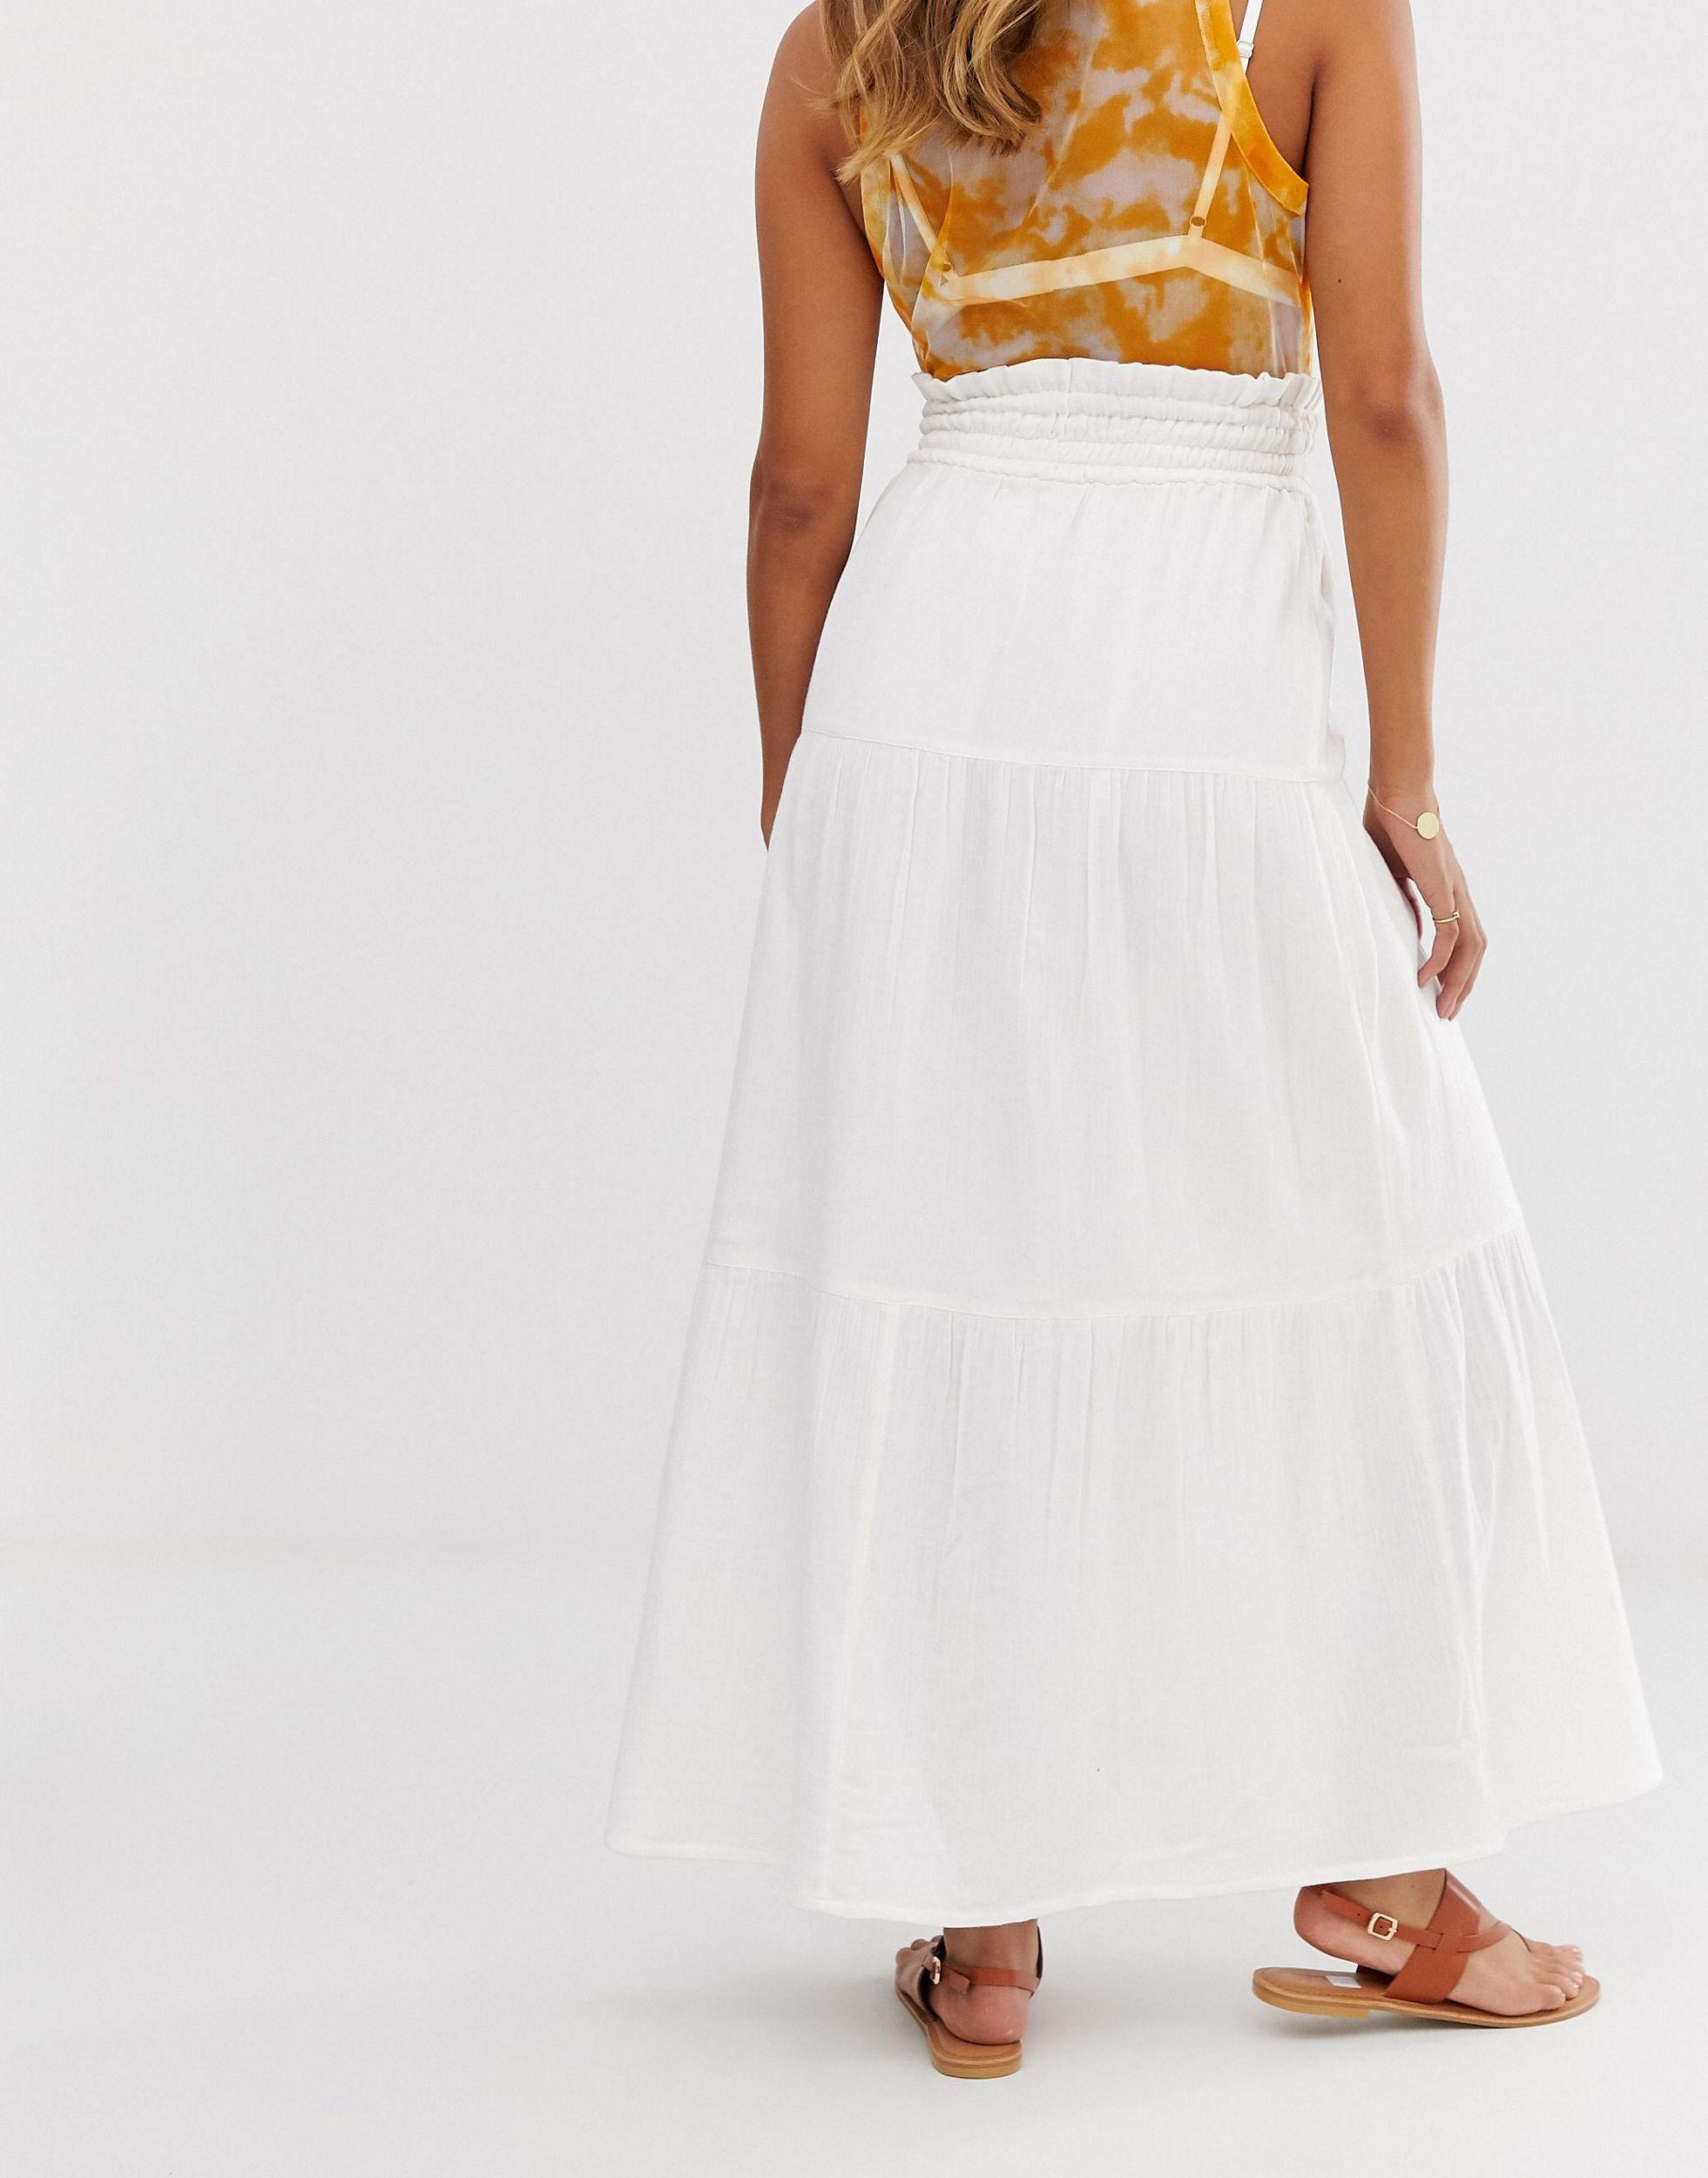 ASOS Cotton Cheesecloth Tiered Summer Maxi Skirt in White - Lyst